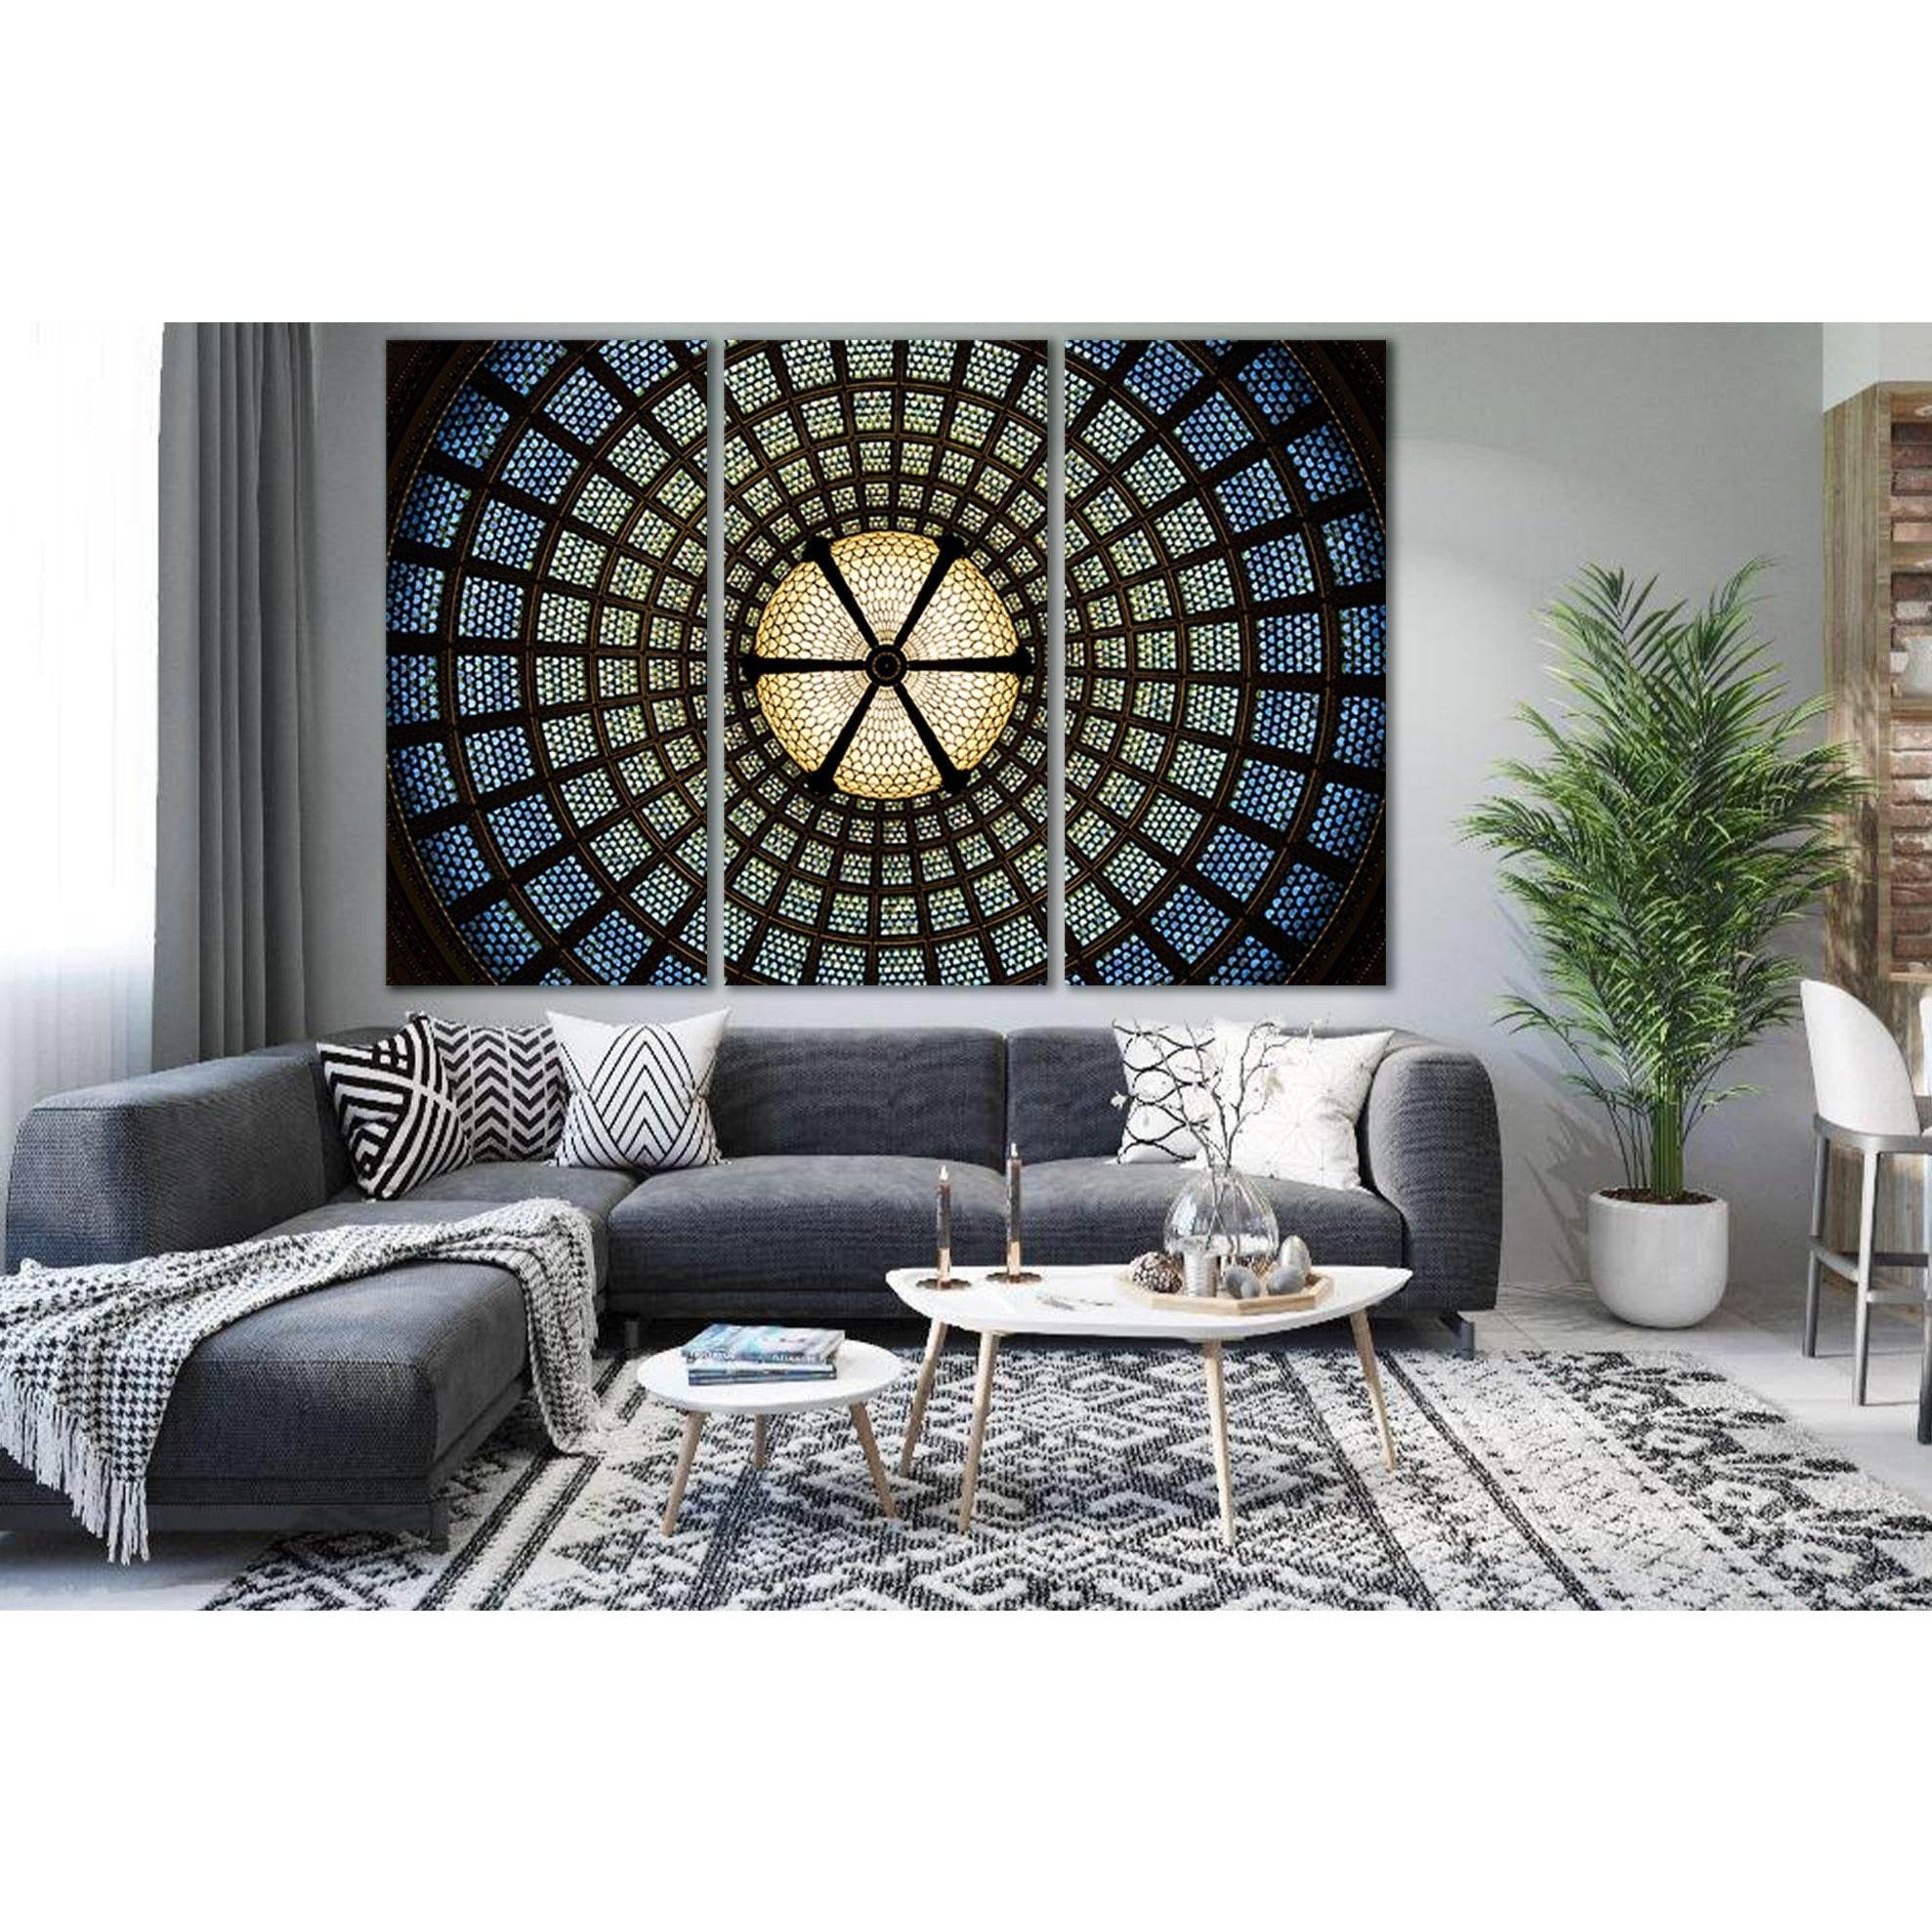 Ceiling Wall Architecture №SL1387 Ready to Hang Canvas Print